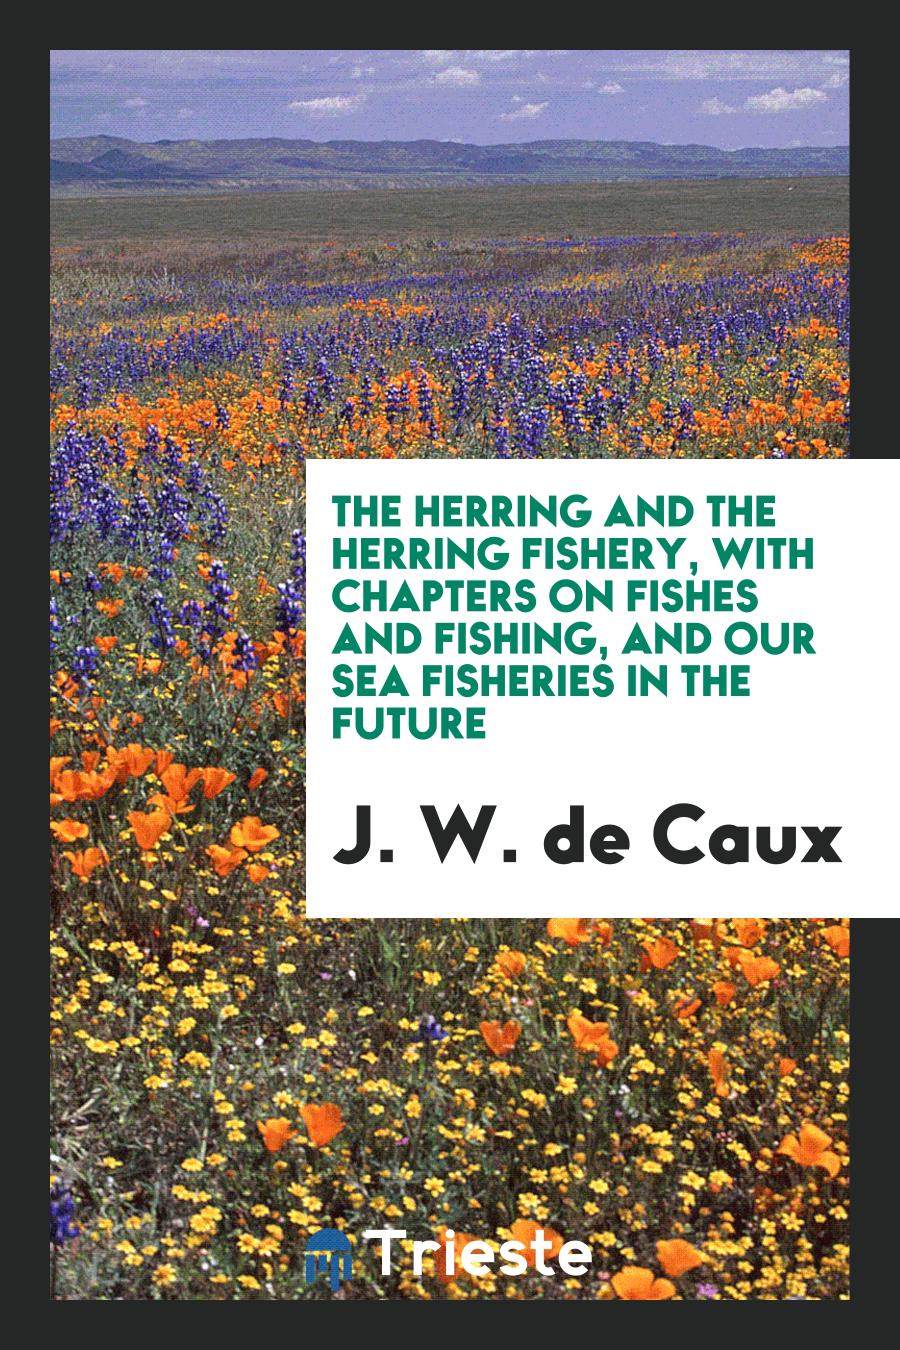 The Herring and the Herring Fishery, with Chapters on Fishes and Fishing, and Our Sea Fisheries in the Future